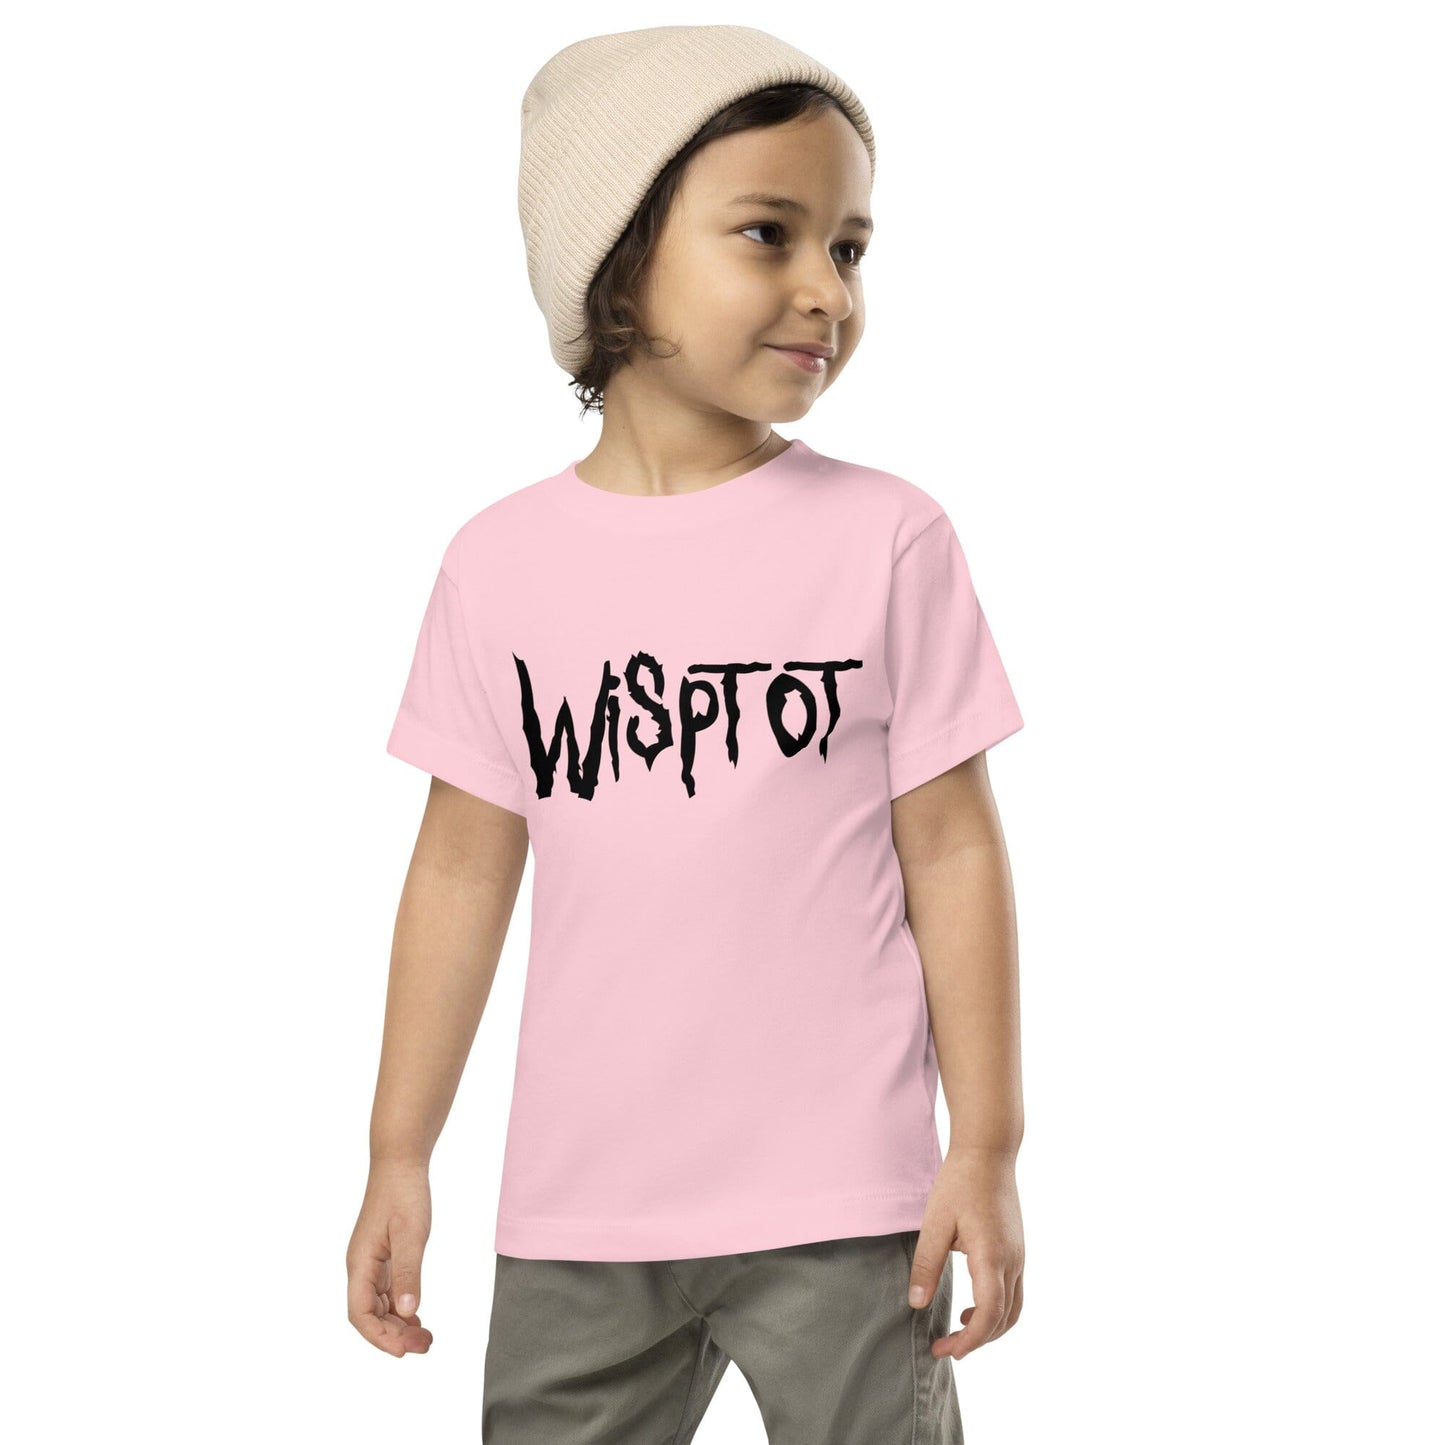 WispTot TODDLER T-Shirt [Unfoiled] (All net proceeds go to equally to Kitty CrusAIDe and Rags to Riches Animal Rescue) JoyousJoyfulJoyness Pink 2T 